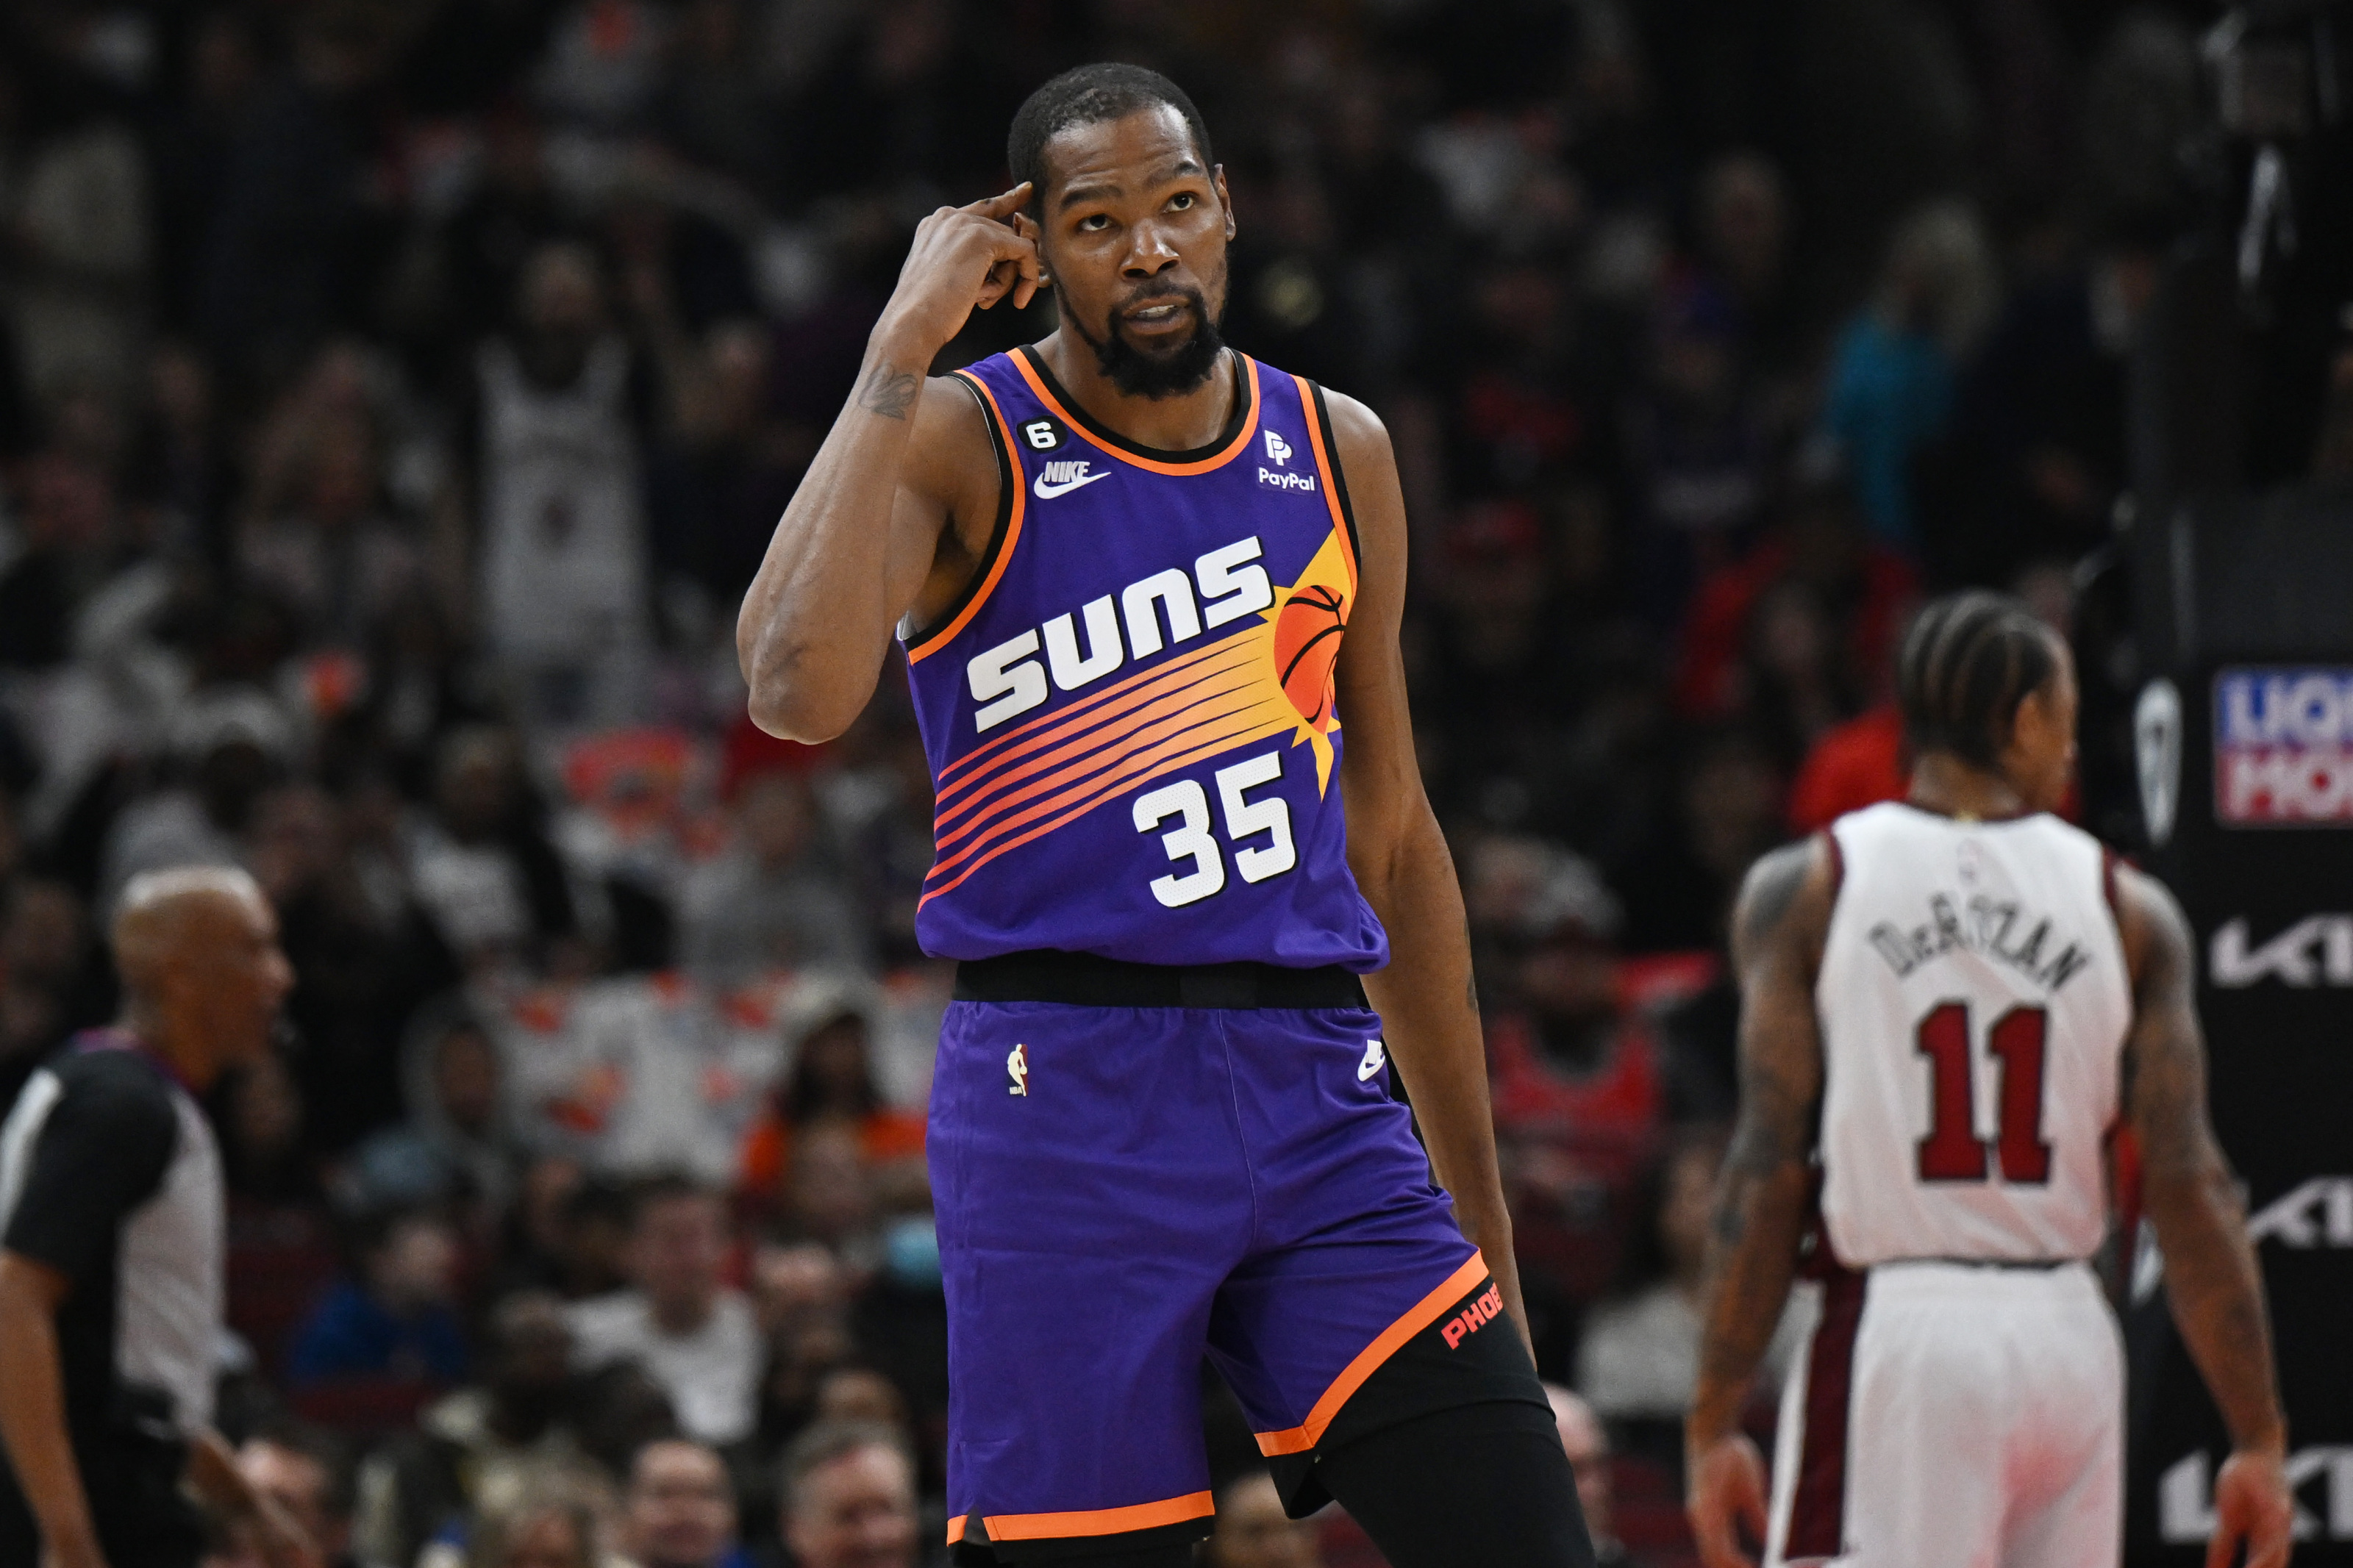 Sources: Kevin Durant traded to Phoenix Suns in blockbuster move